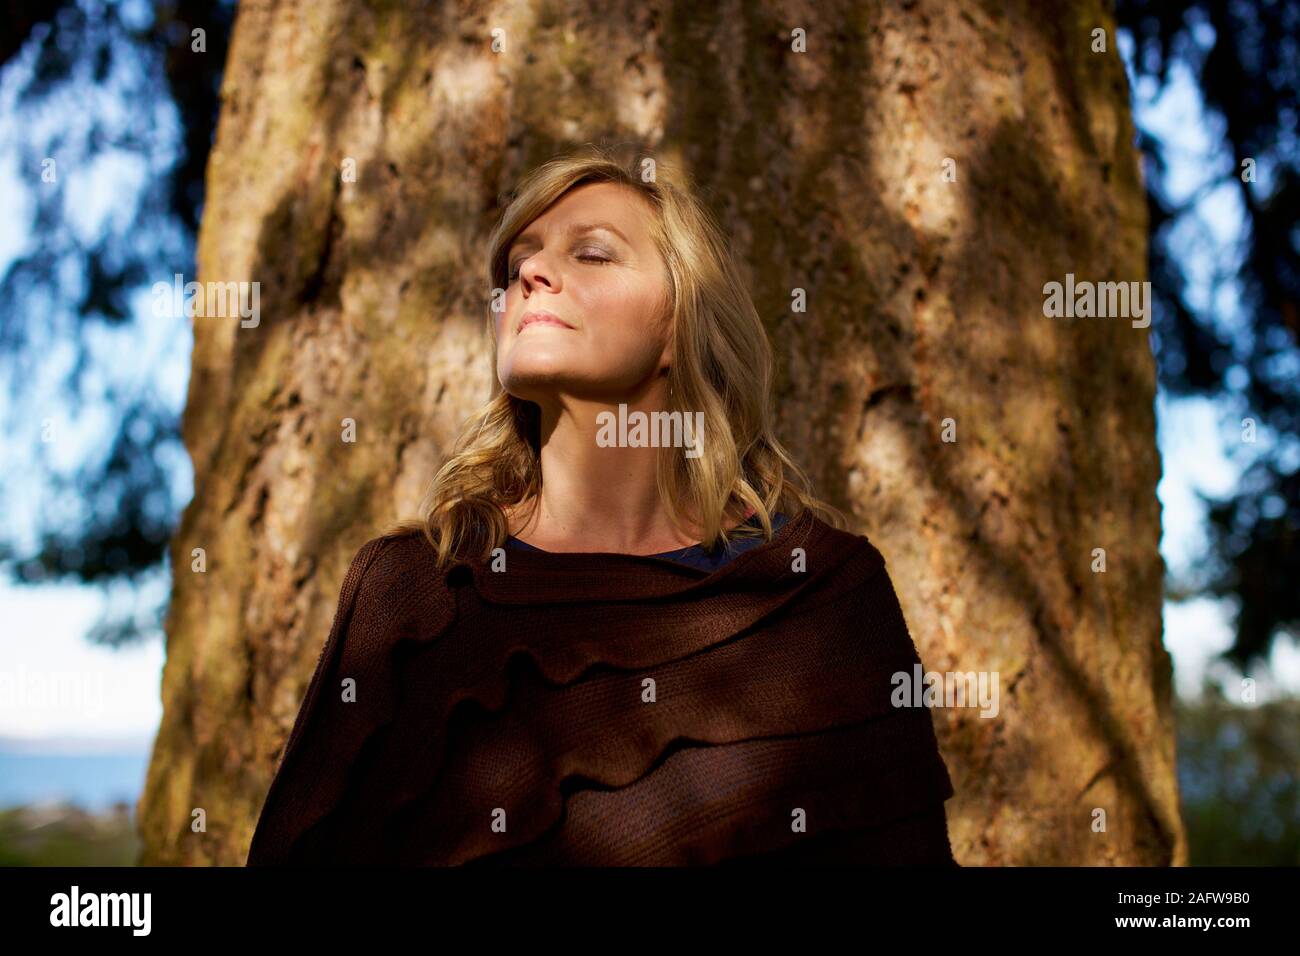 Portrait serene woman with eyes closed standing at sunny tree trunk Stock Photo